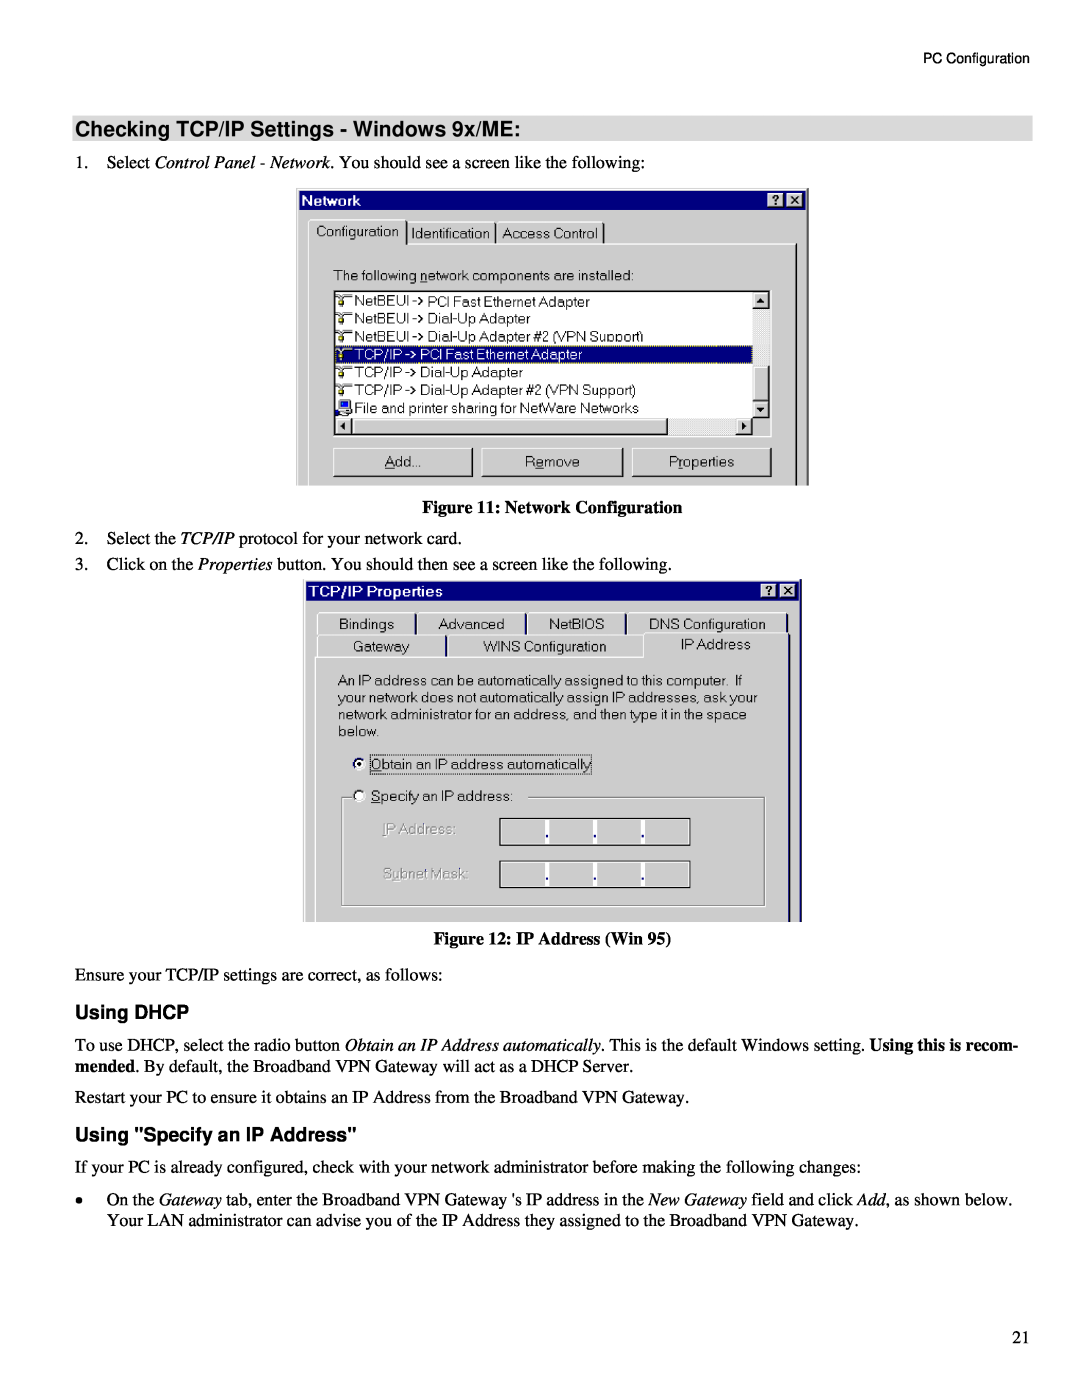 TRENDnet TW100-BRV324 manual Checking TCP/IP Settings - Windows 9x/ME, Using DHCP, Using Specify an IP Address 